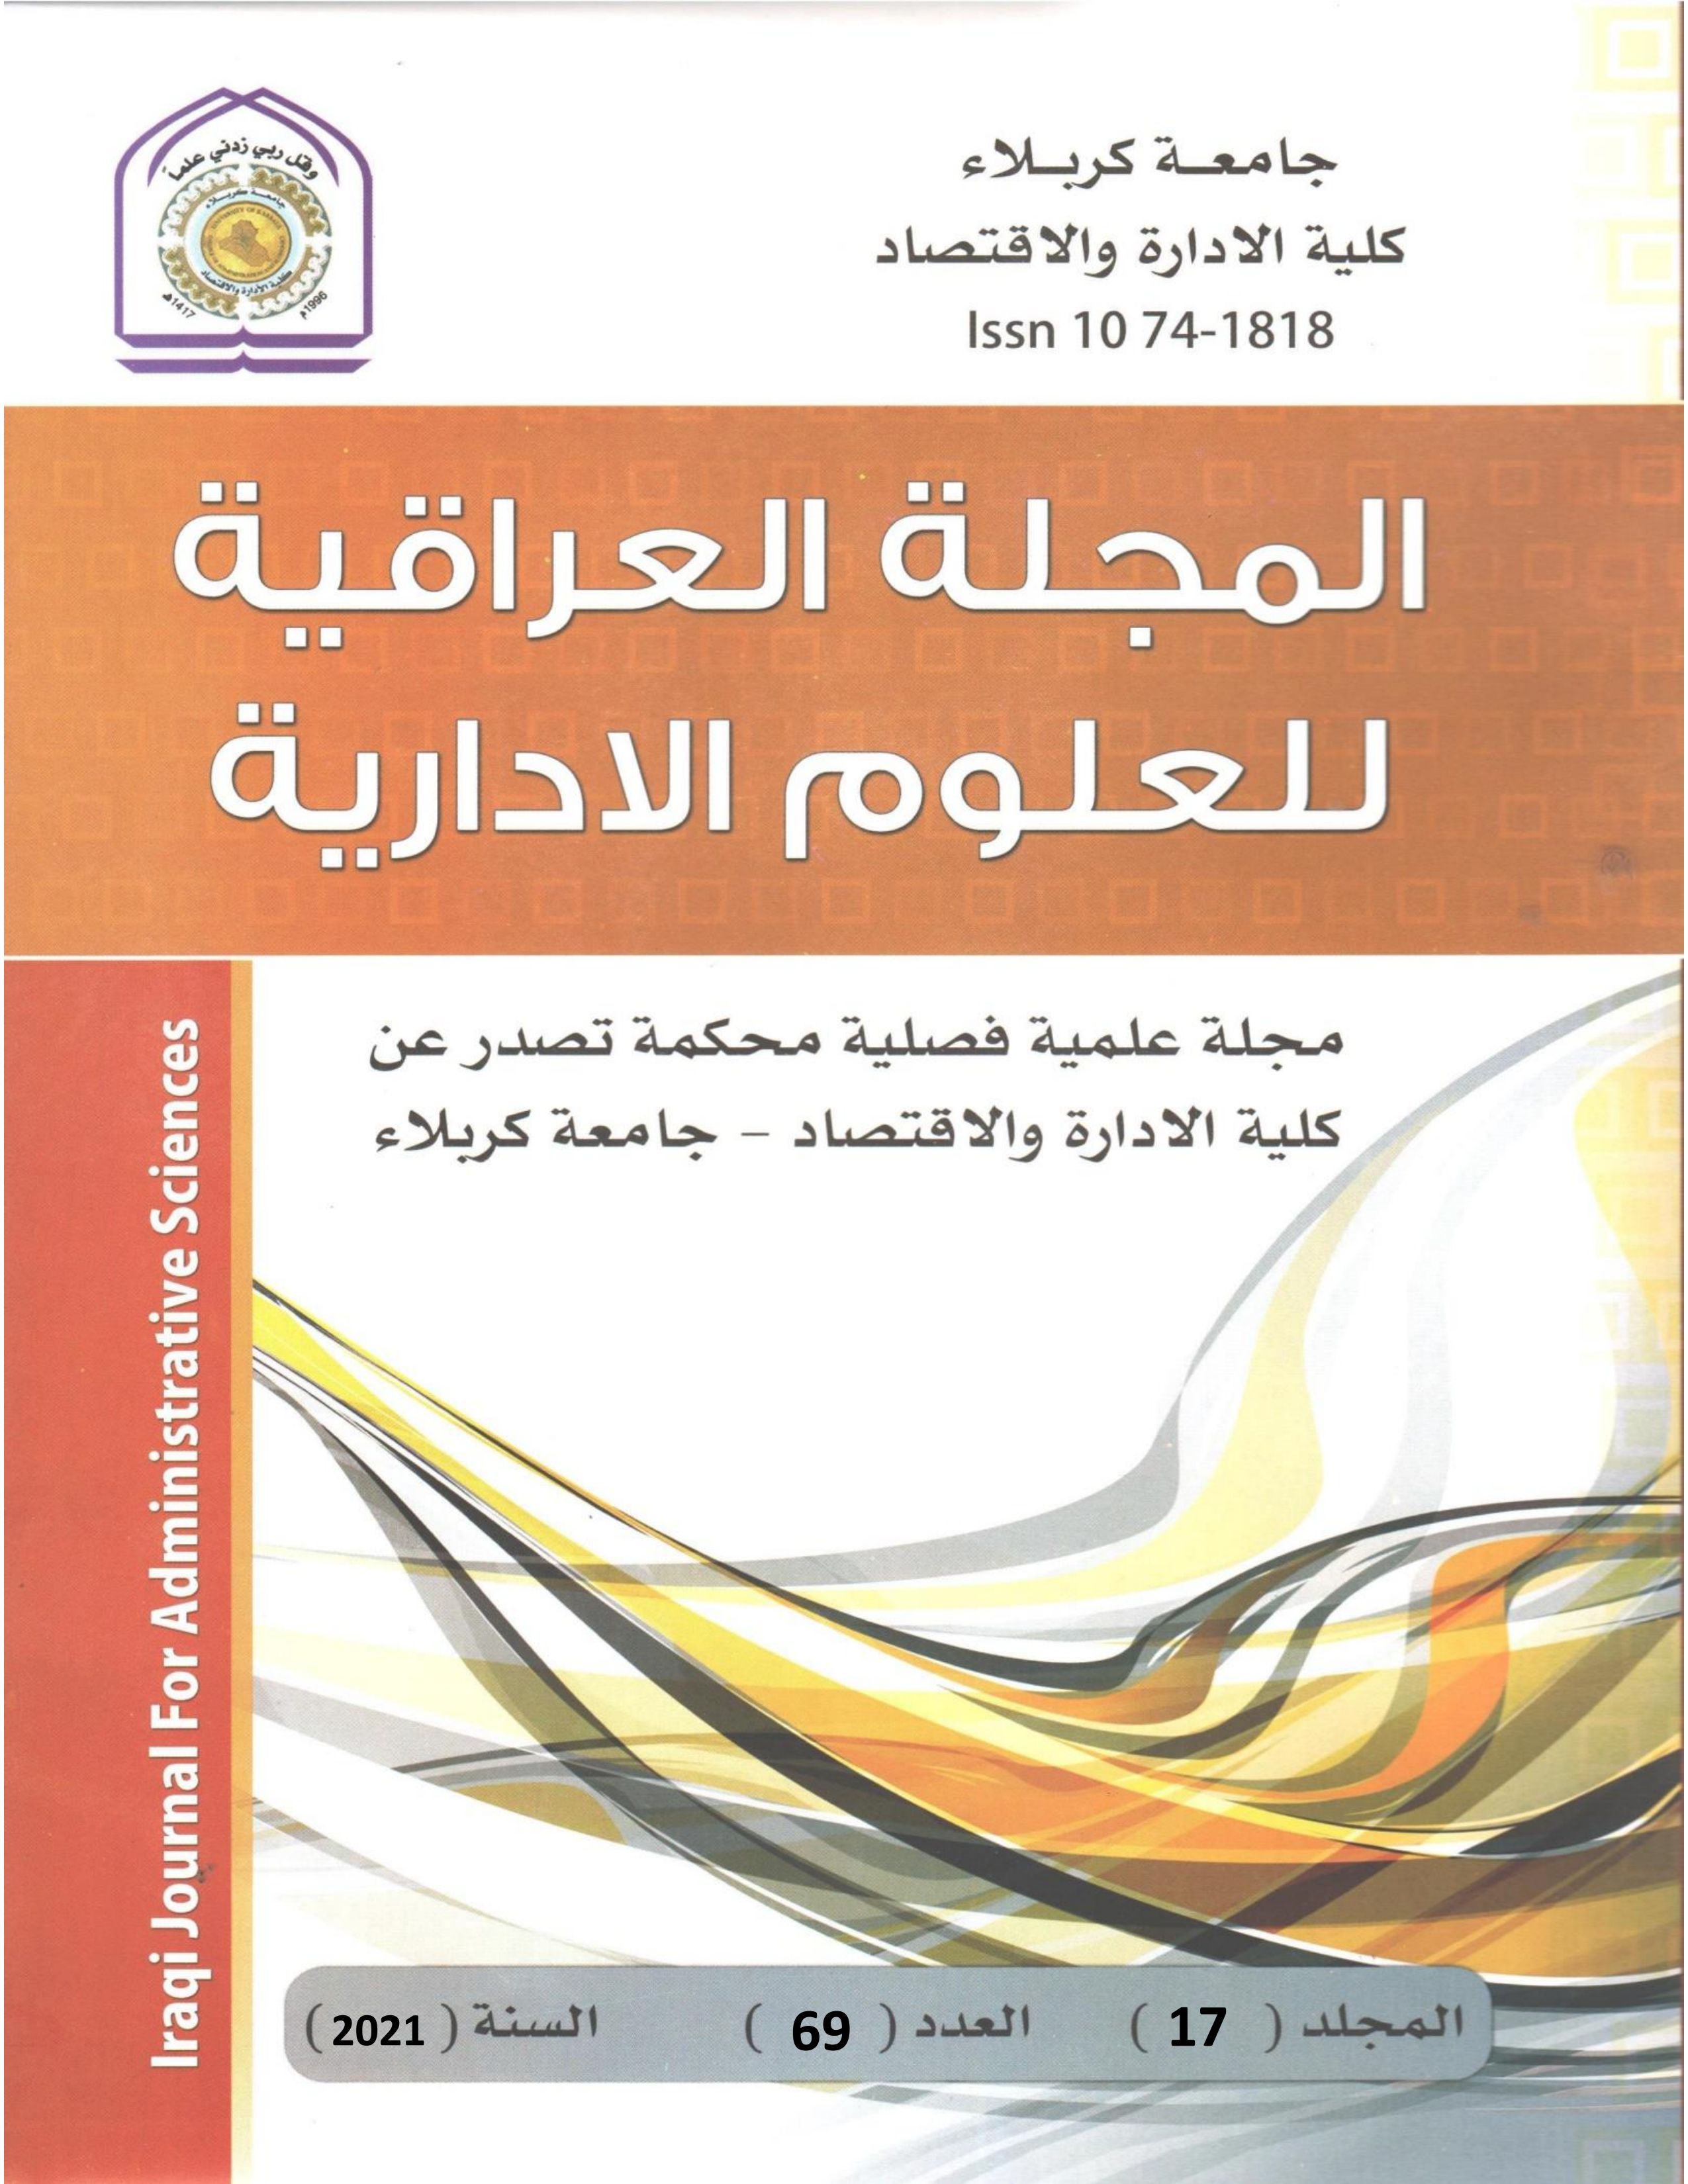 					View Vol. 17 No. 67 (2021): Iraqi Journal for Administrative Sciences
				